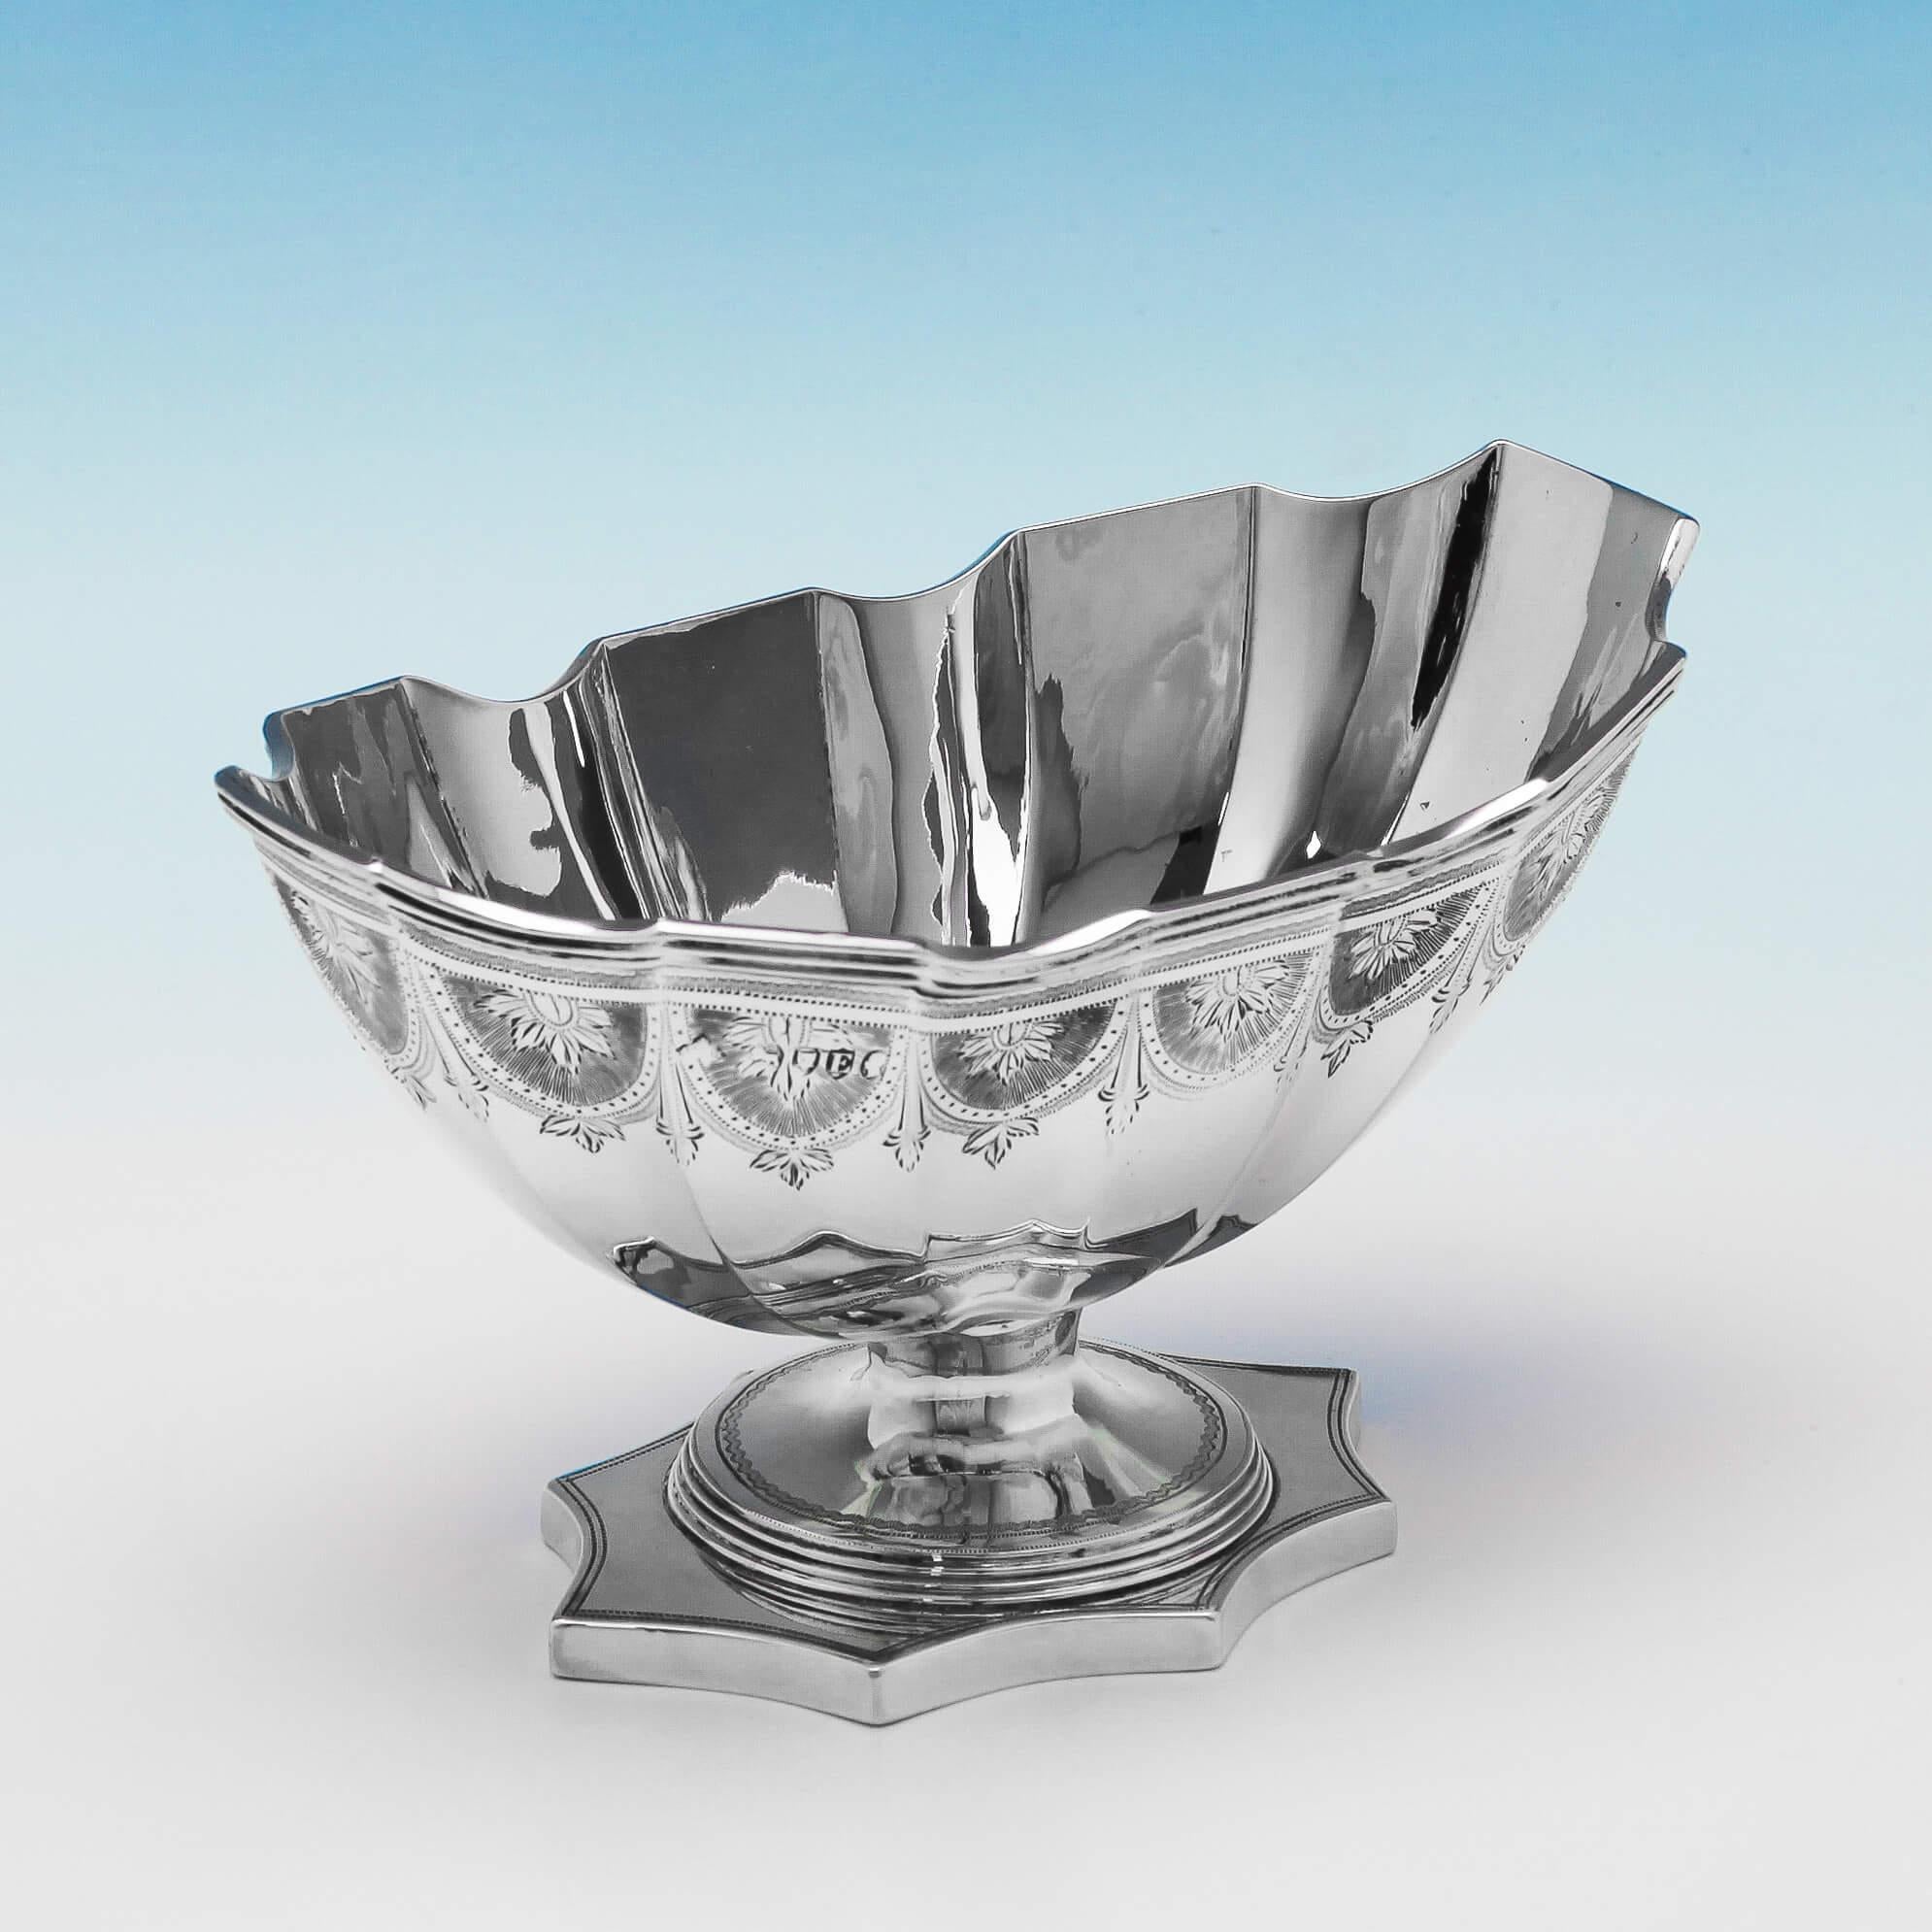 Hallmarked in London in 1880 by A. B. Savoury & Sons, this attractive, Victorian, antique sterling silver bowl, features bright cut engraved decoration, shaped sides, and stands on a scalloped pedestal foot. The bowl measures: 3.5 inches (8.5cm)